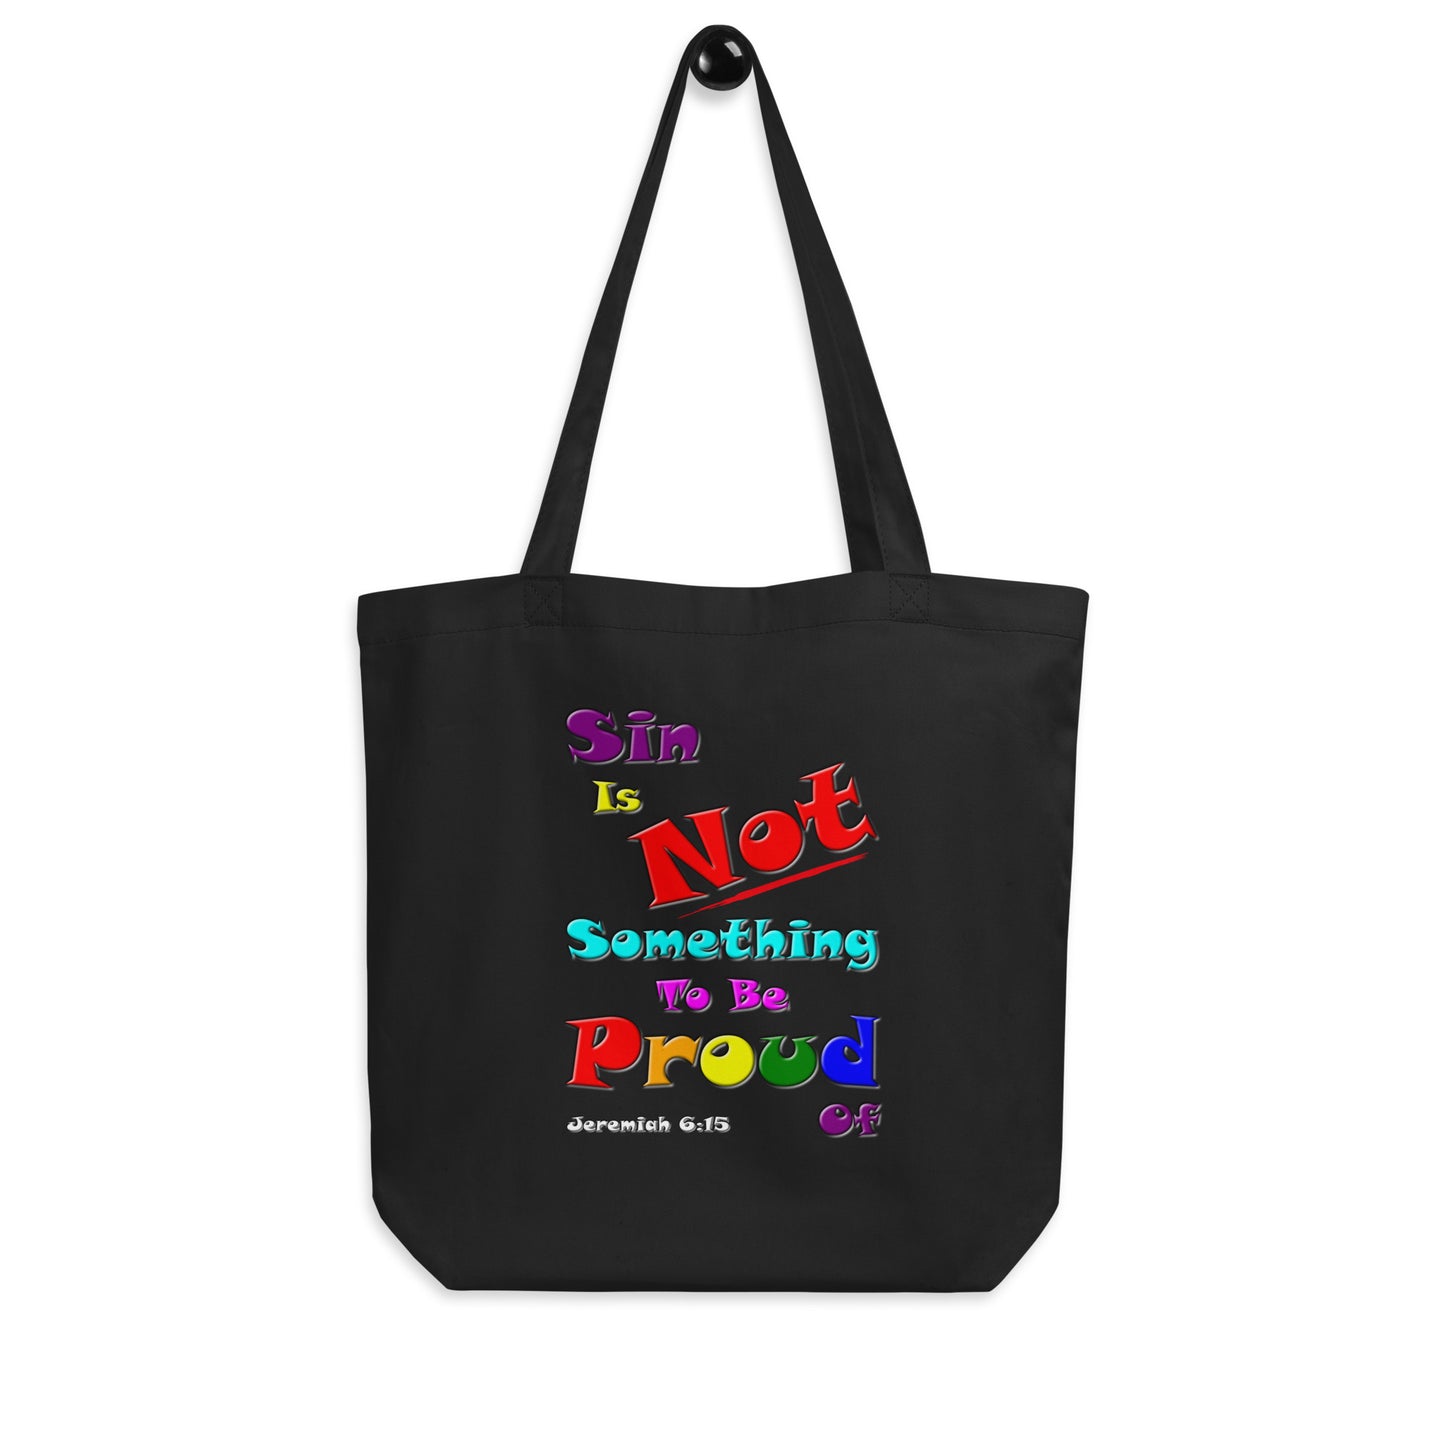 A018 Tote – Eco Tote Bag Featuring Jeremiah 6 15 with the colorful Text “Sin Is Not Something To Be Proud Of.”